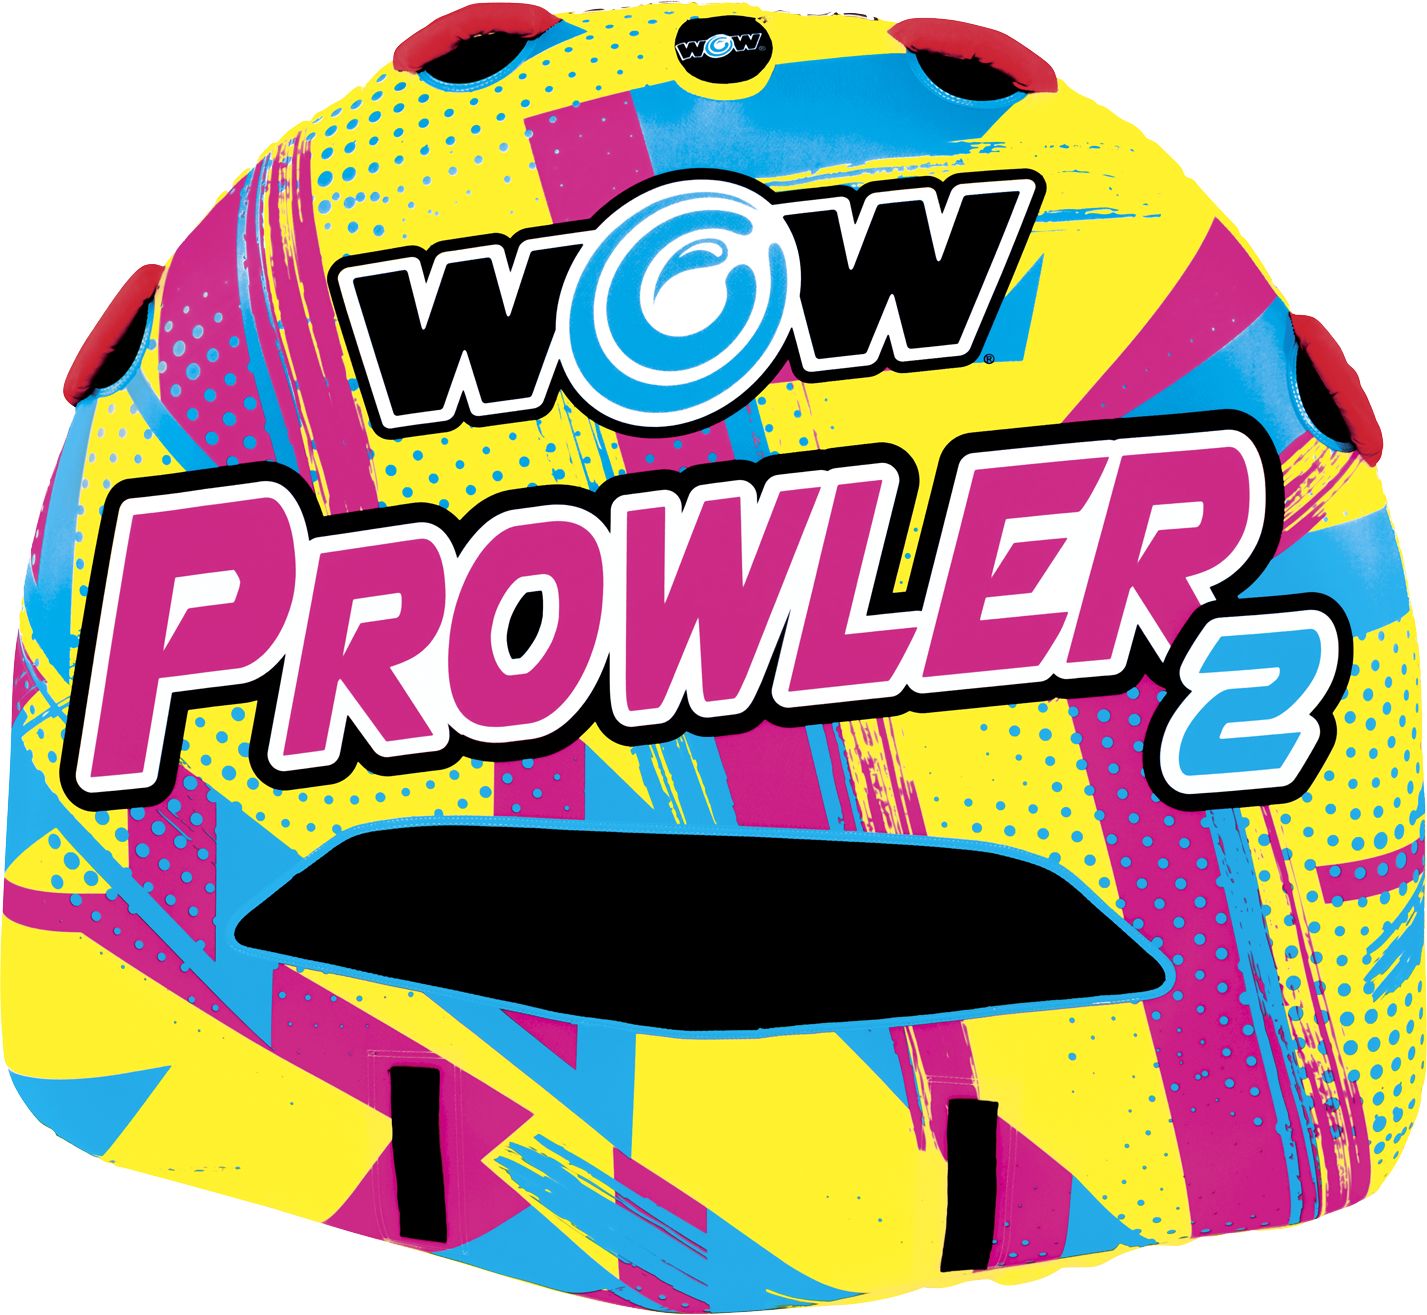 WOW, PROWLER 2P TW